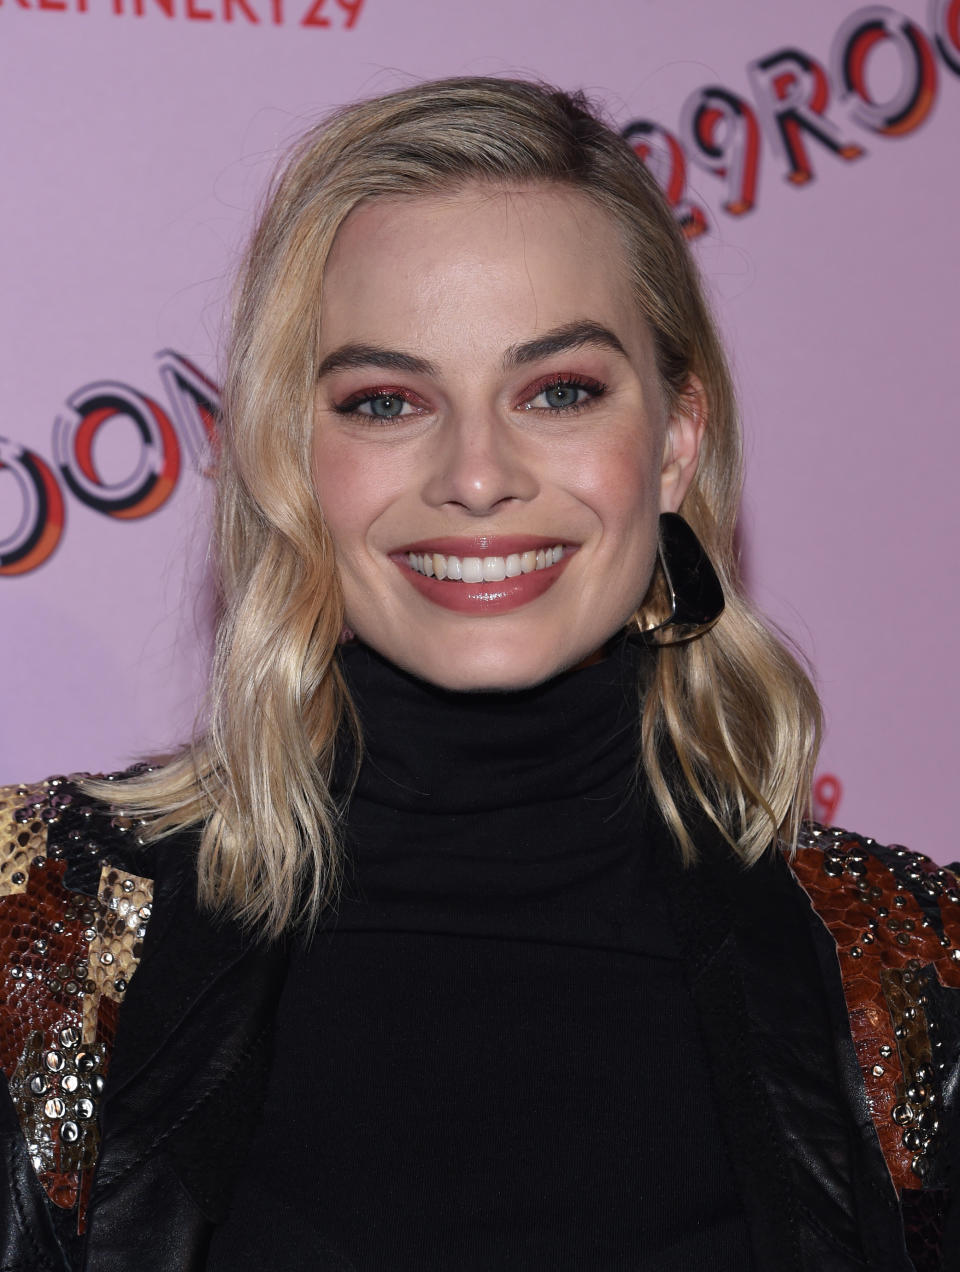 Makeup artist <a href="https://www.instagram.com/p/BcZ__hOhL0M/?hl=en&amp;taken-by=patidubroff" target="_blank">Patti DuBroff</a>&nbsp;created this red-toned makeup look on Margot Robbie for the opening night of 29Rooms: Turn it into Art in Los Angeles, Dec. 6, 2017.&nbsp;